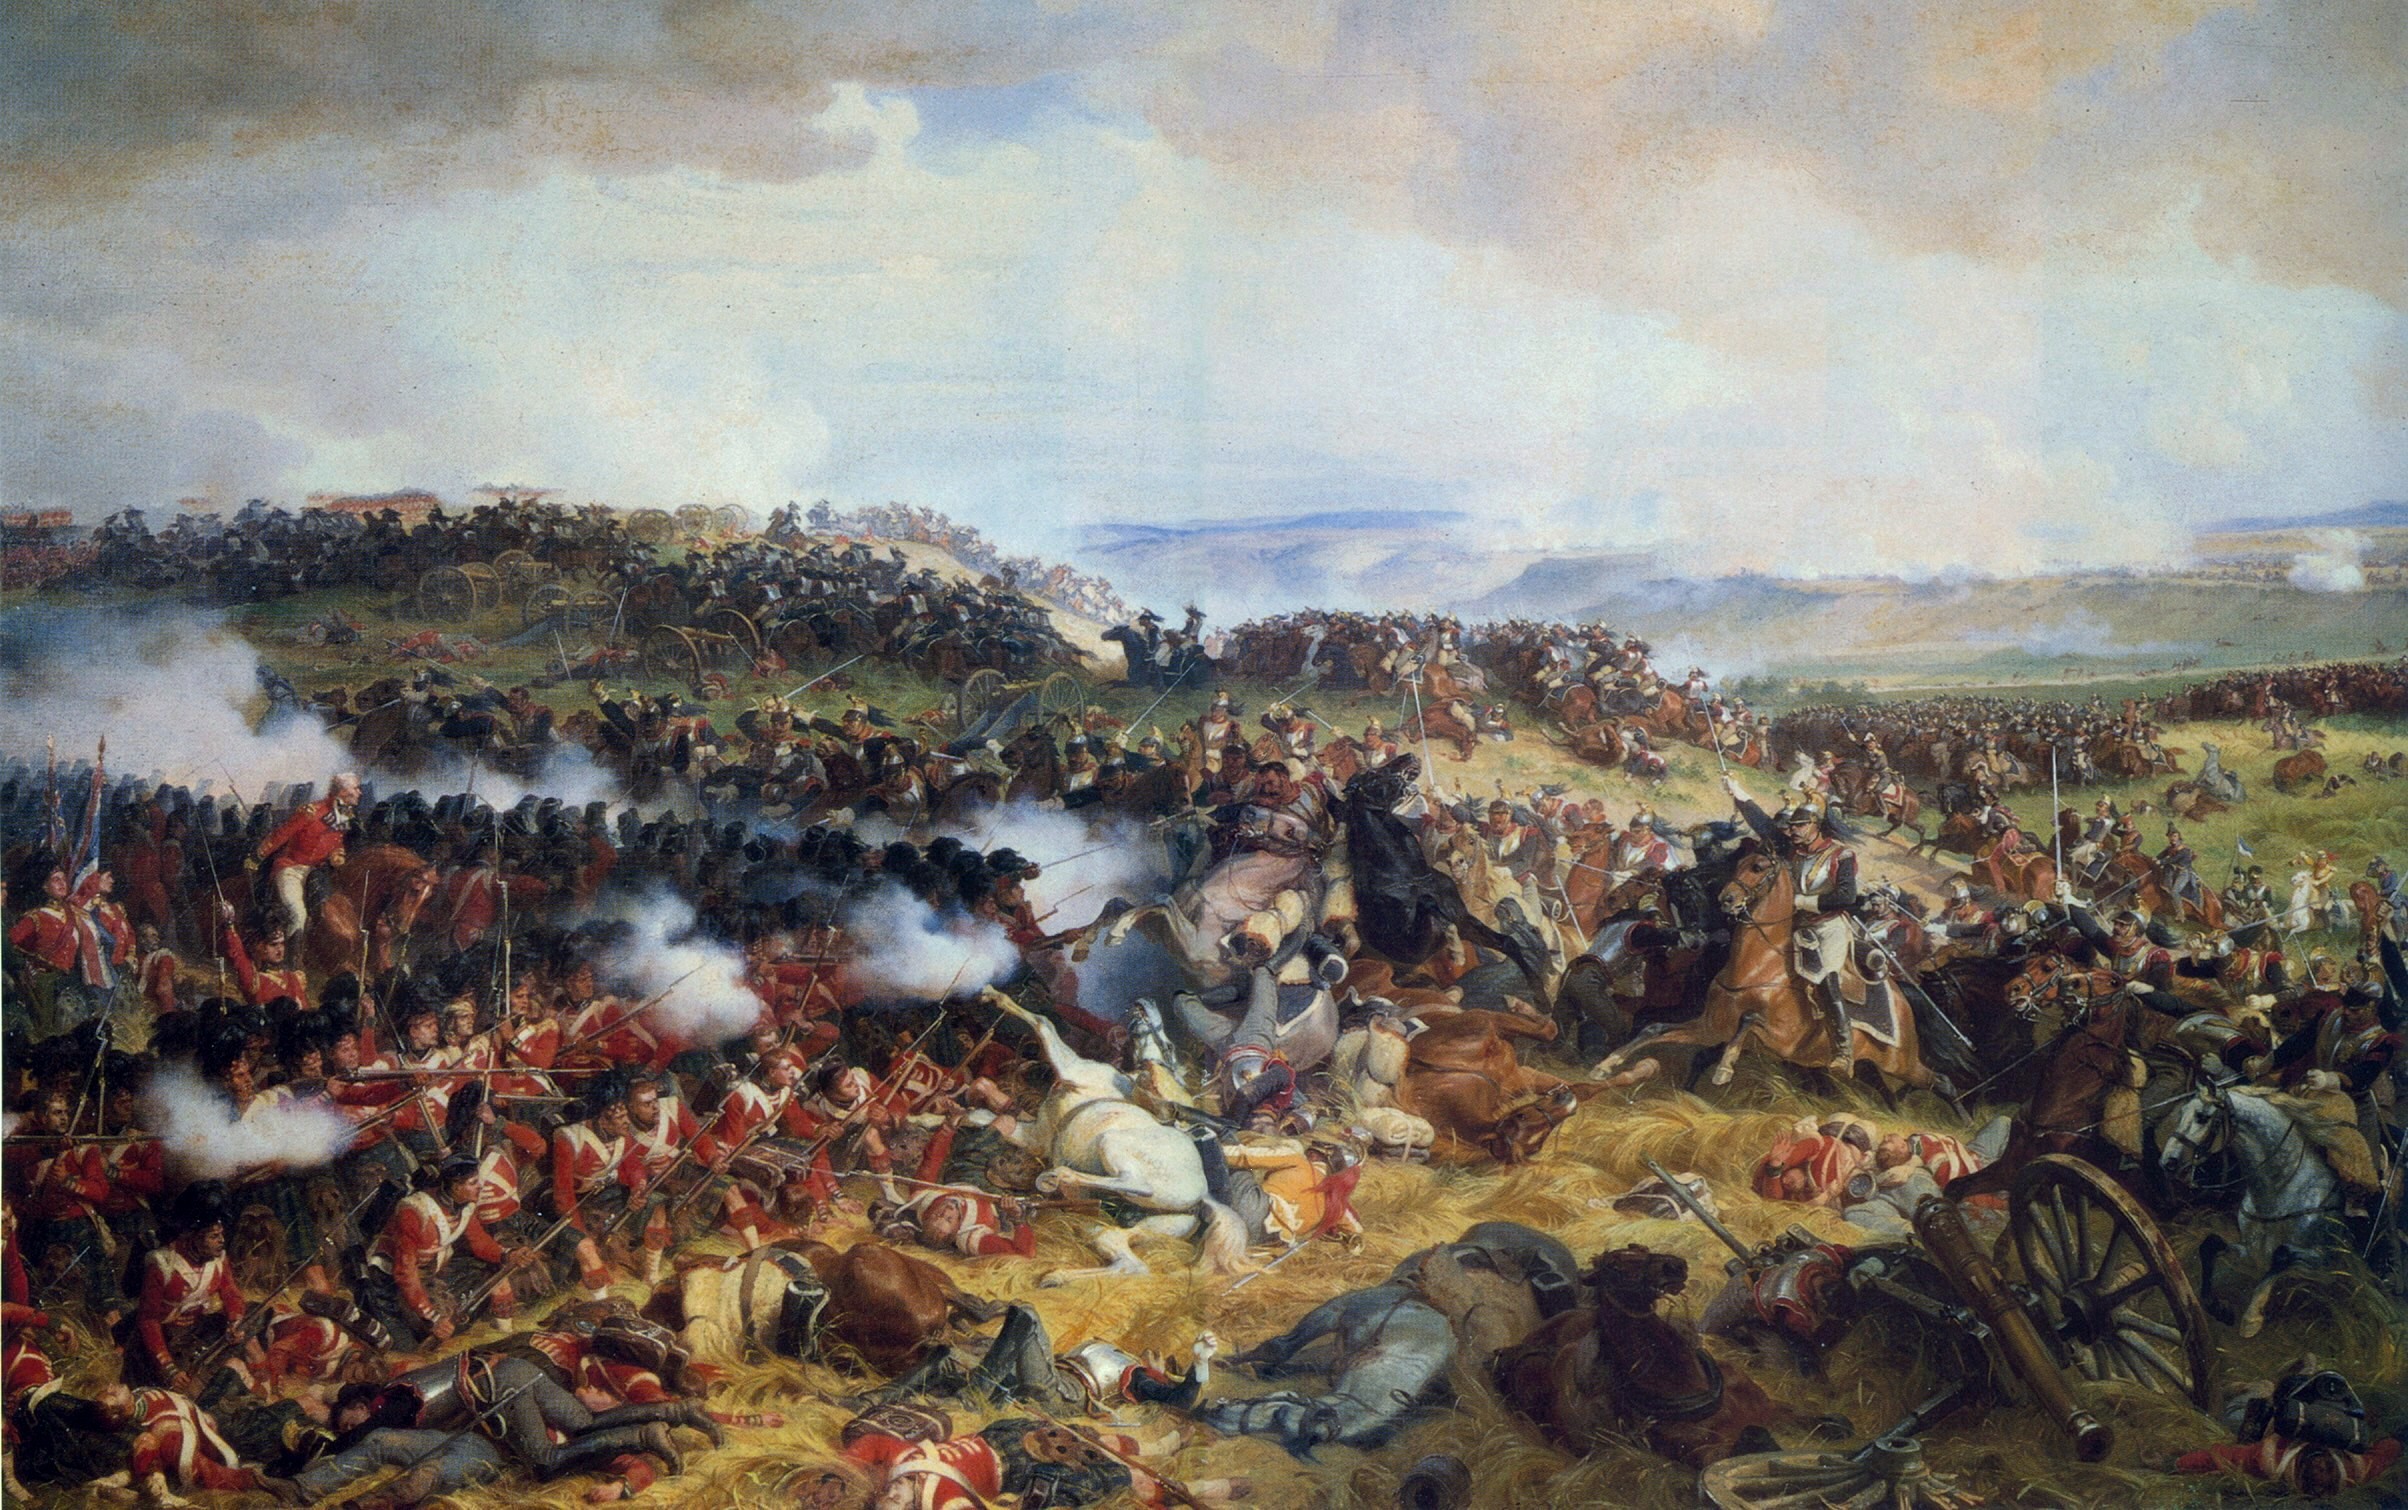 "The Battle of Waterloo: The British Squares Receiving the Charge of the French Cuirassiers," by Henri Félix Emmanuel Philippoteaux (1815–1884). Public domain, via Wikimedia Commons.